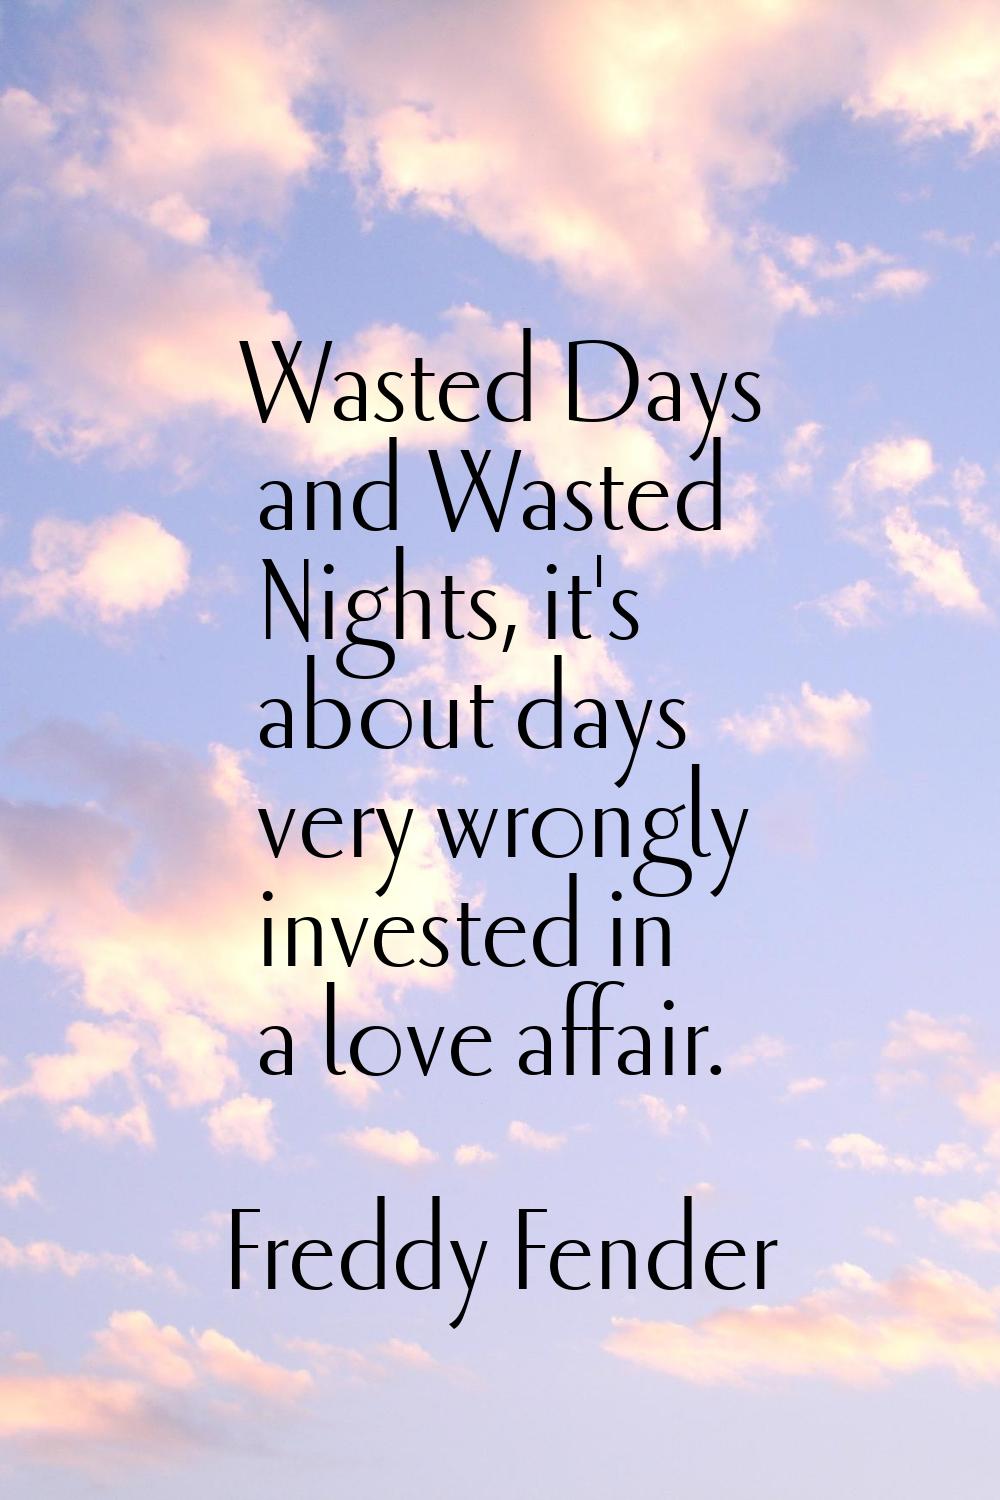 Wasted Days and Wasted Nights, it's about days very wrongly invested in a love affair.